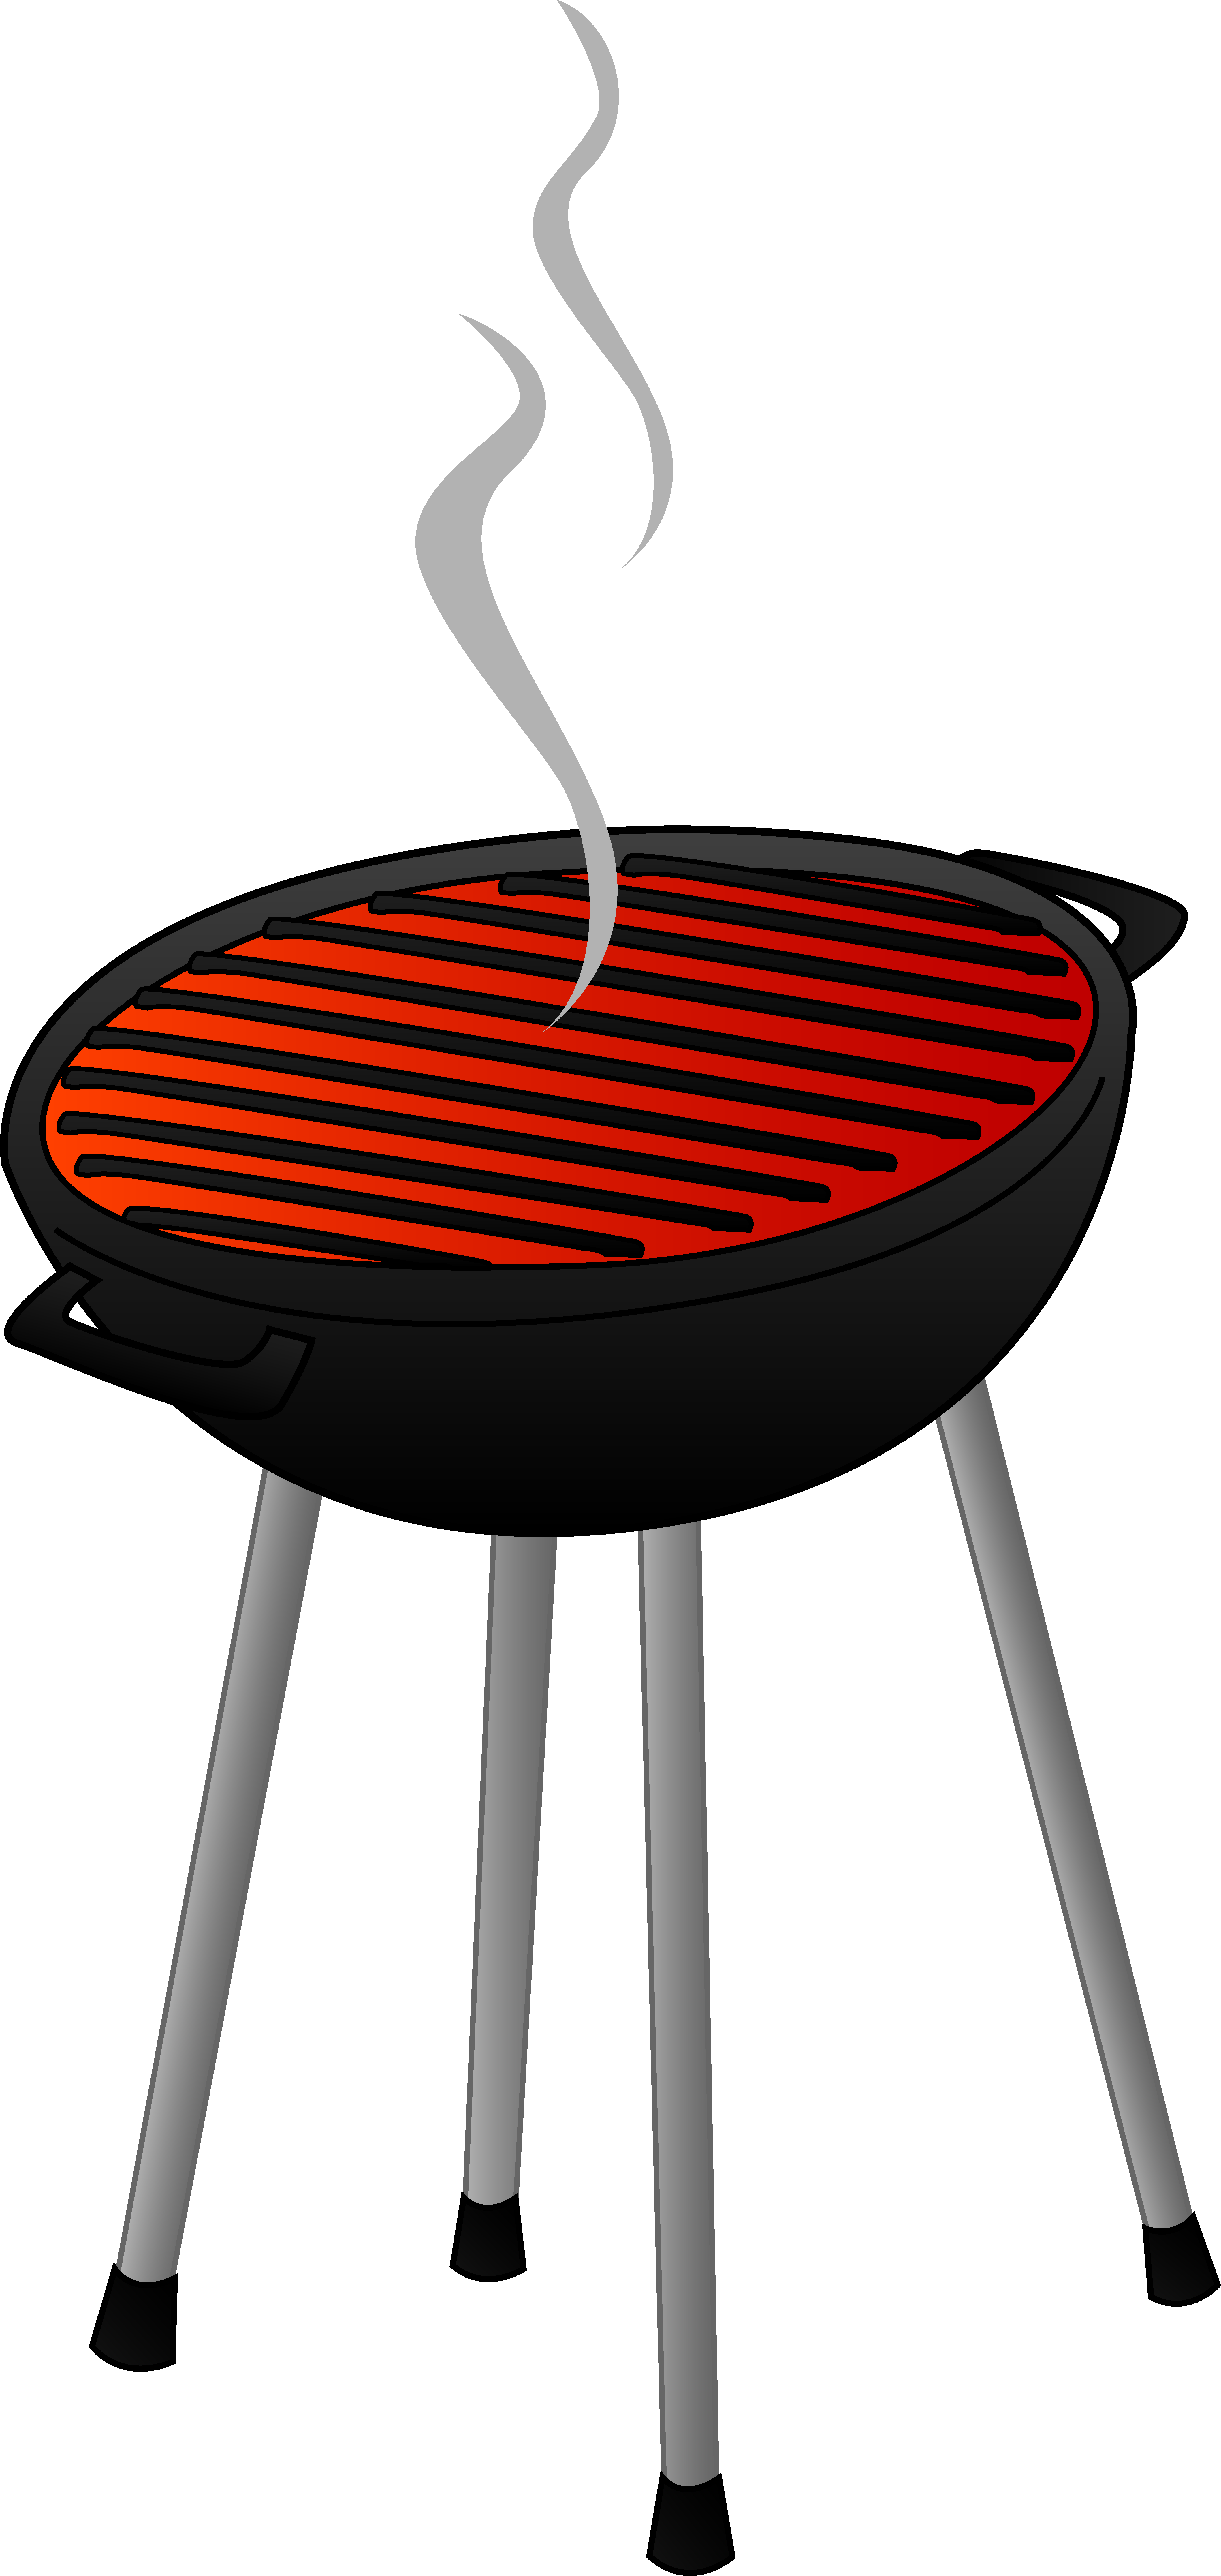 Bbq open pit clipart 